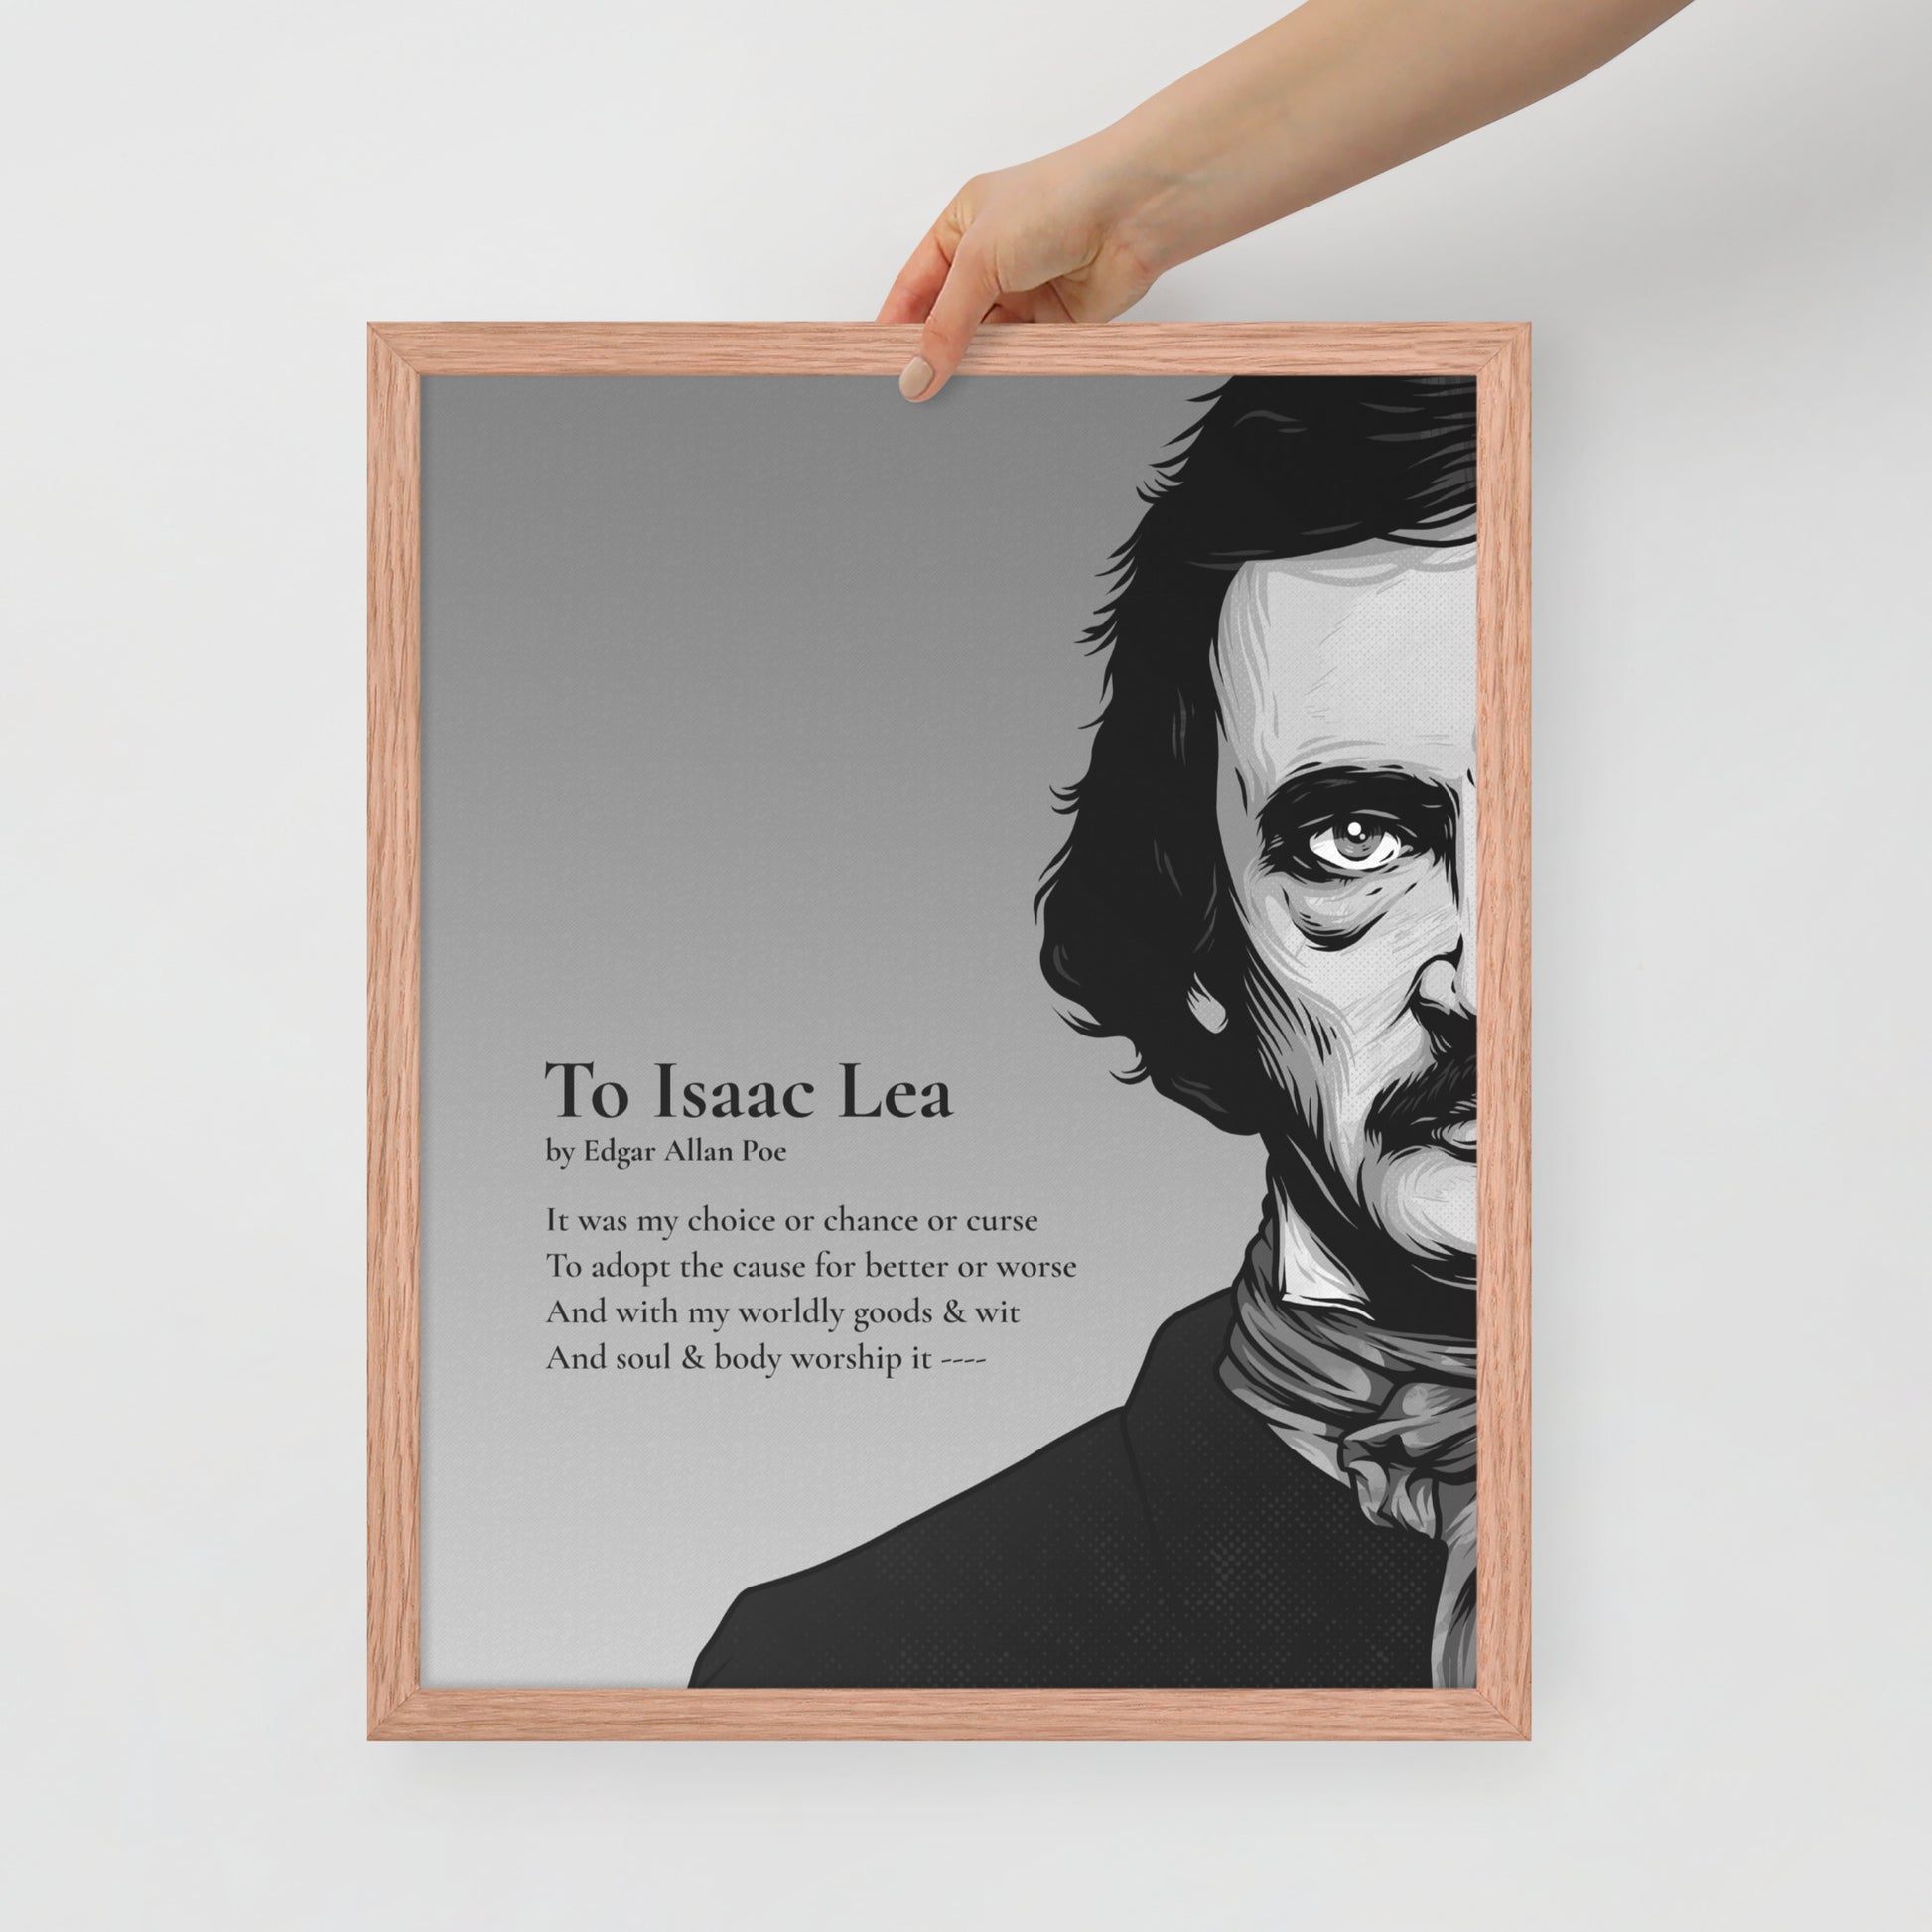 Edgar Allan Poe's 'To Isaac Lea' Framed Matted Poster - 16 x 20 Red Oak Frame